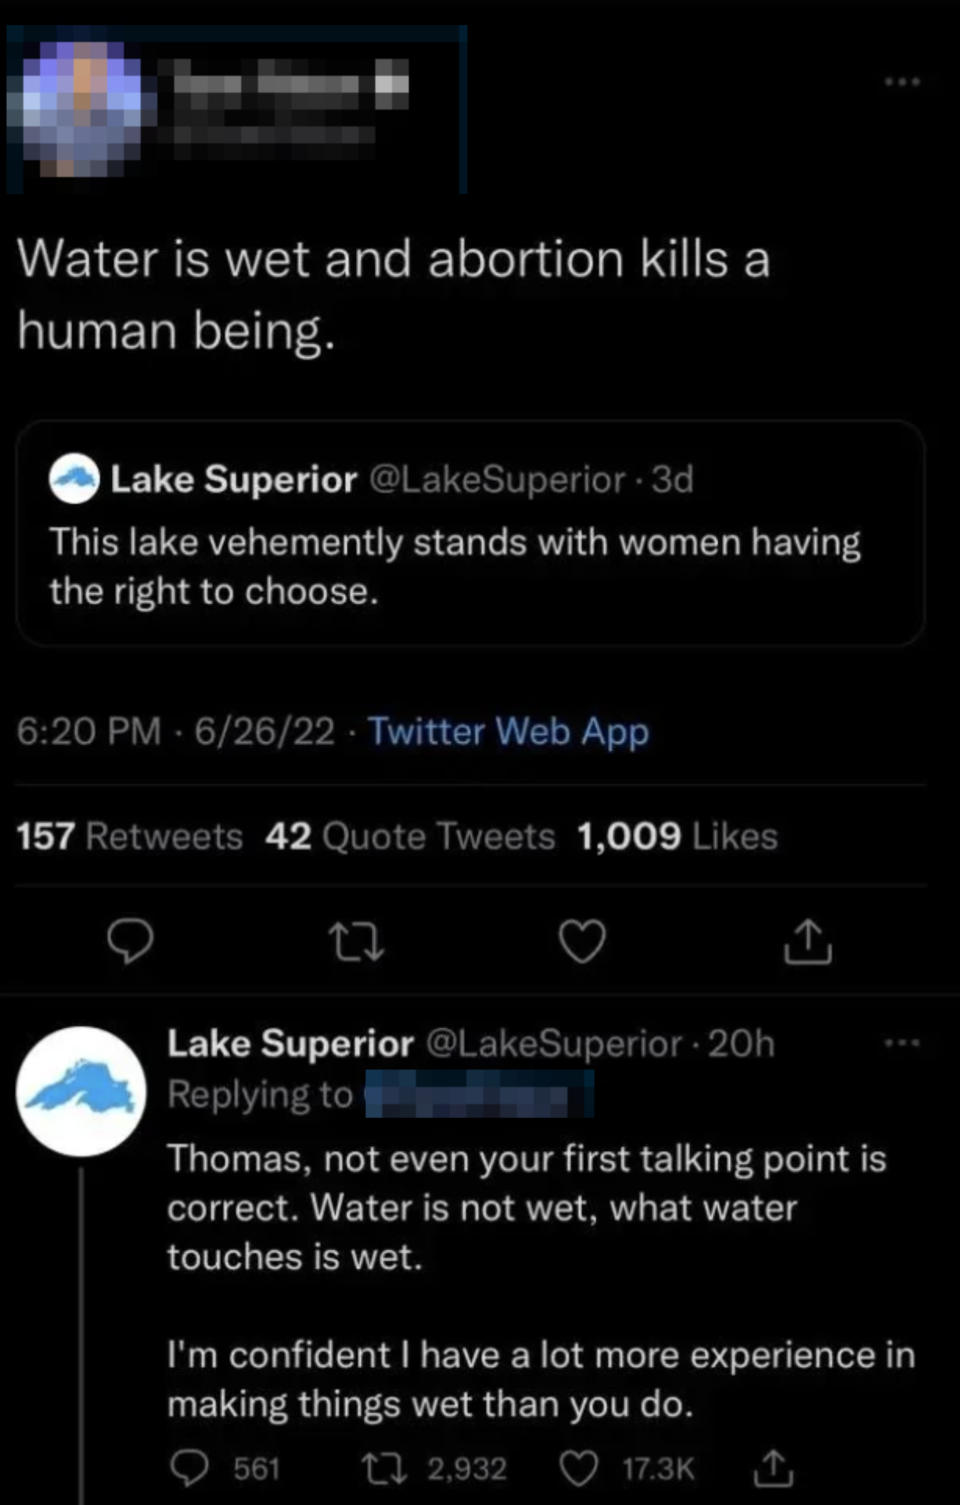 A Twitter conversation thread with users and @LakeSuperior discussing water's non-lethal qualities.